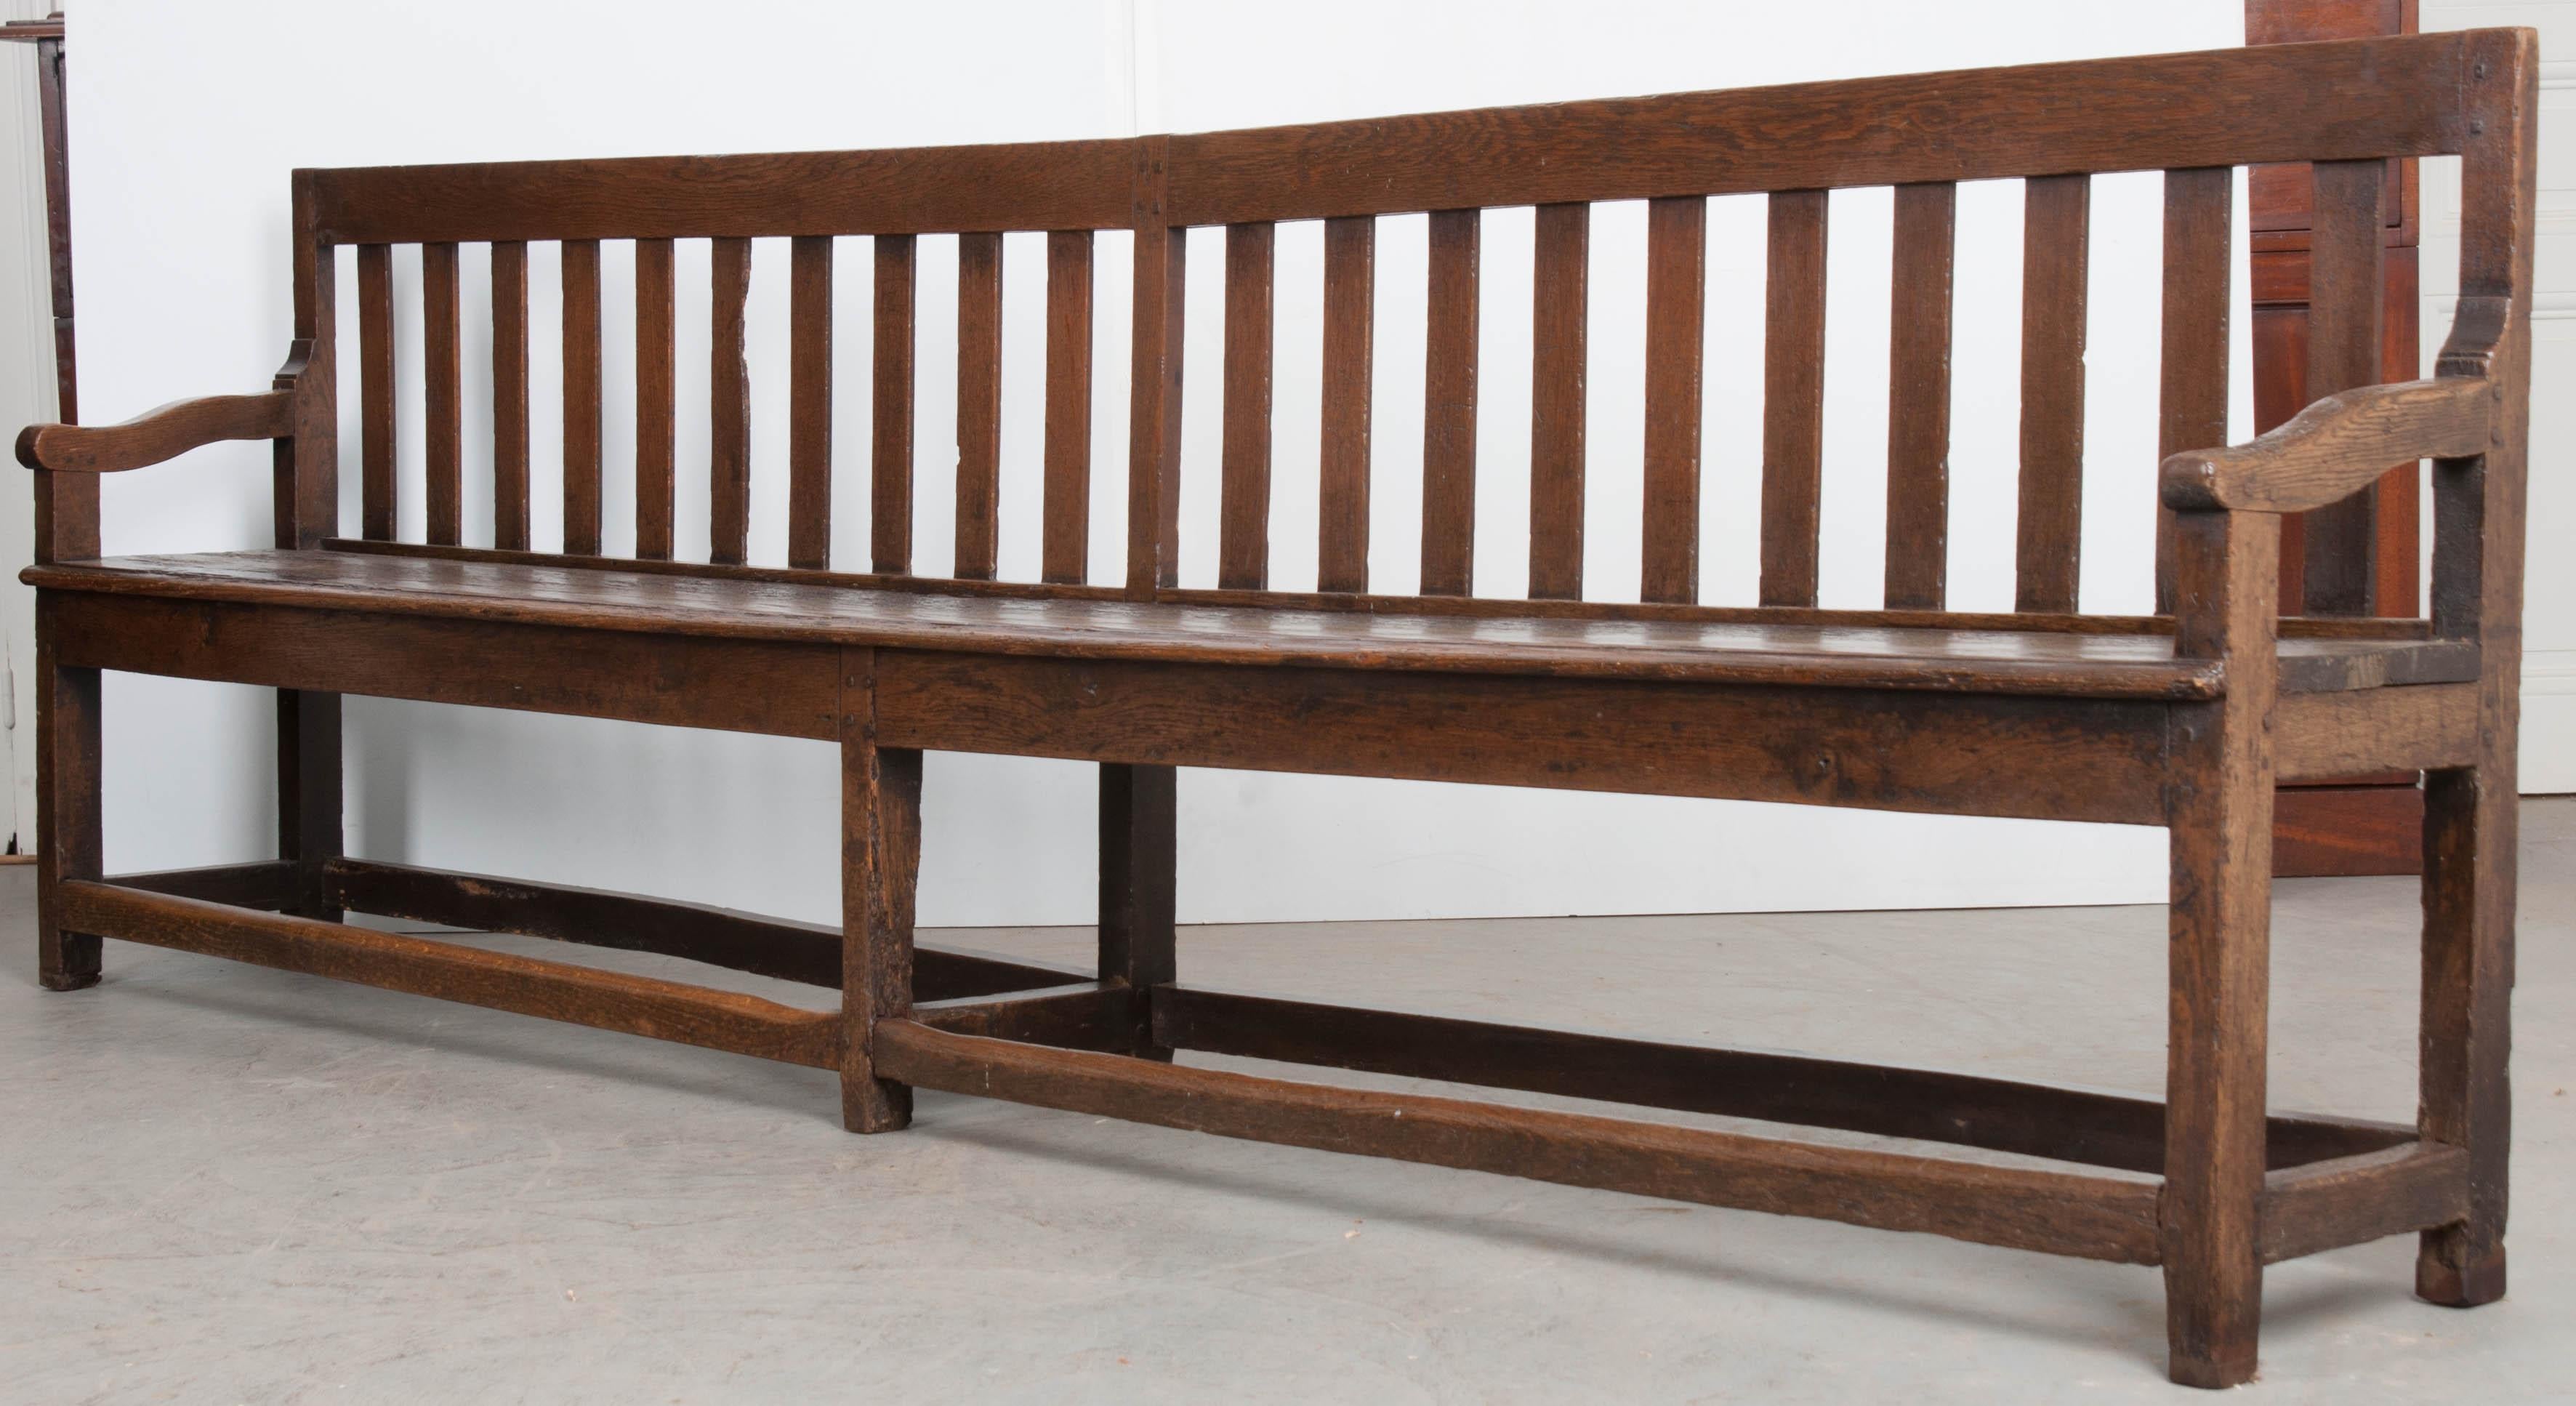 A lengthy oak bench, made in France circa 1880. The antique was designed with functionality in mind, but over the years has become a beautiful piece of furniture. The back is formed with spaced slats to support the back and a long, flat seat. The